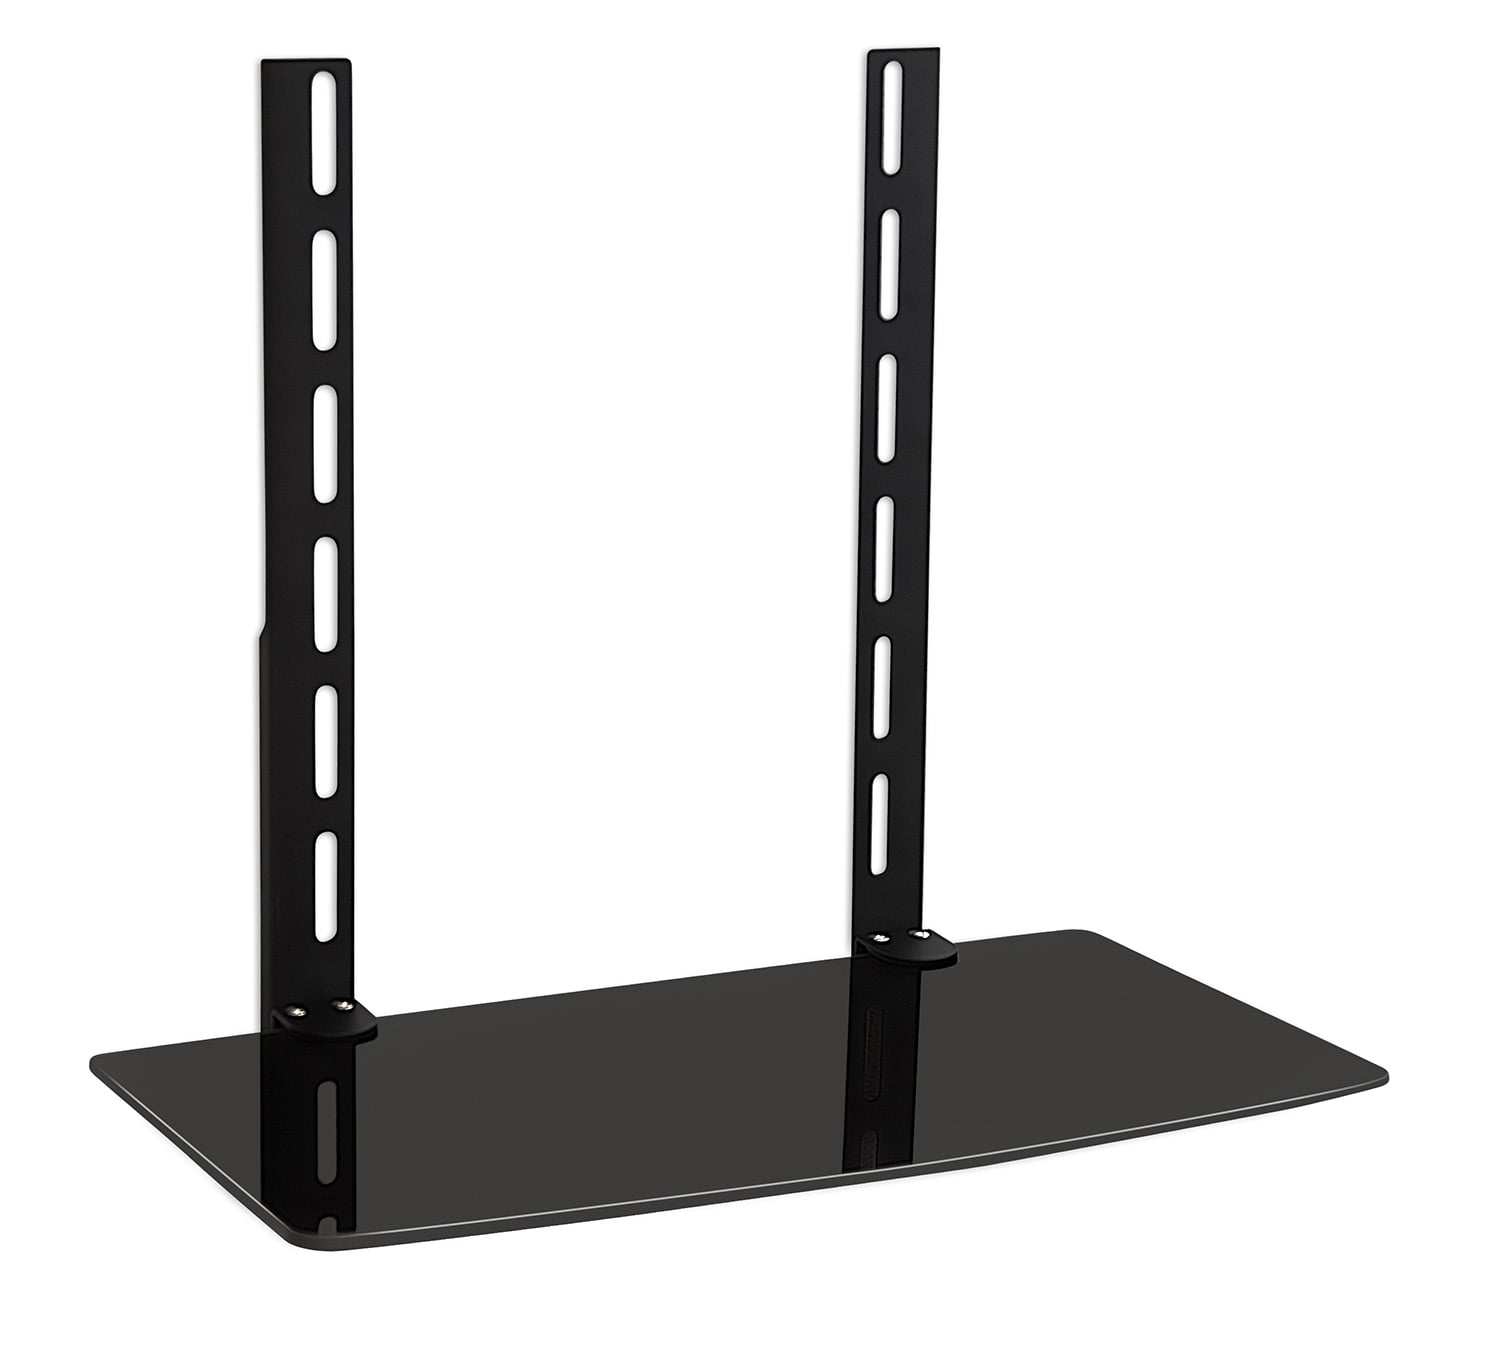 Easy Mount Cable Organizer Kit 50-3338-WH-KIT, Wall Mount TV, HDTV  Installation, Home Theater 